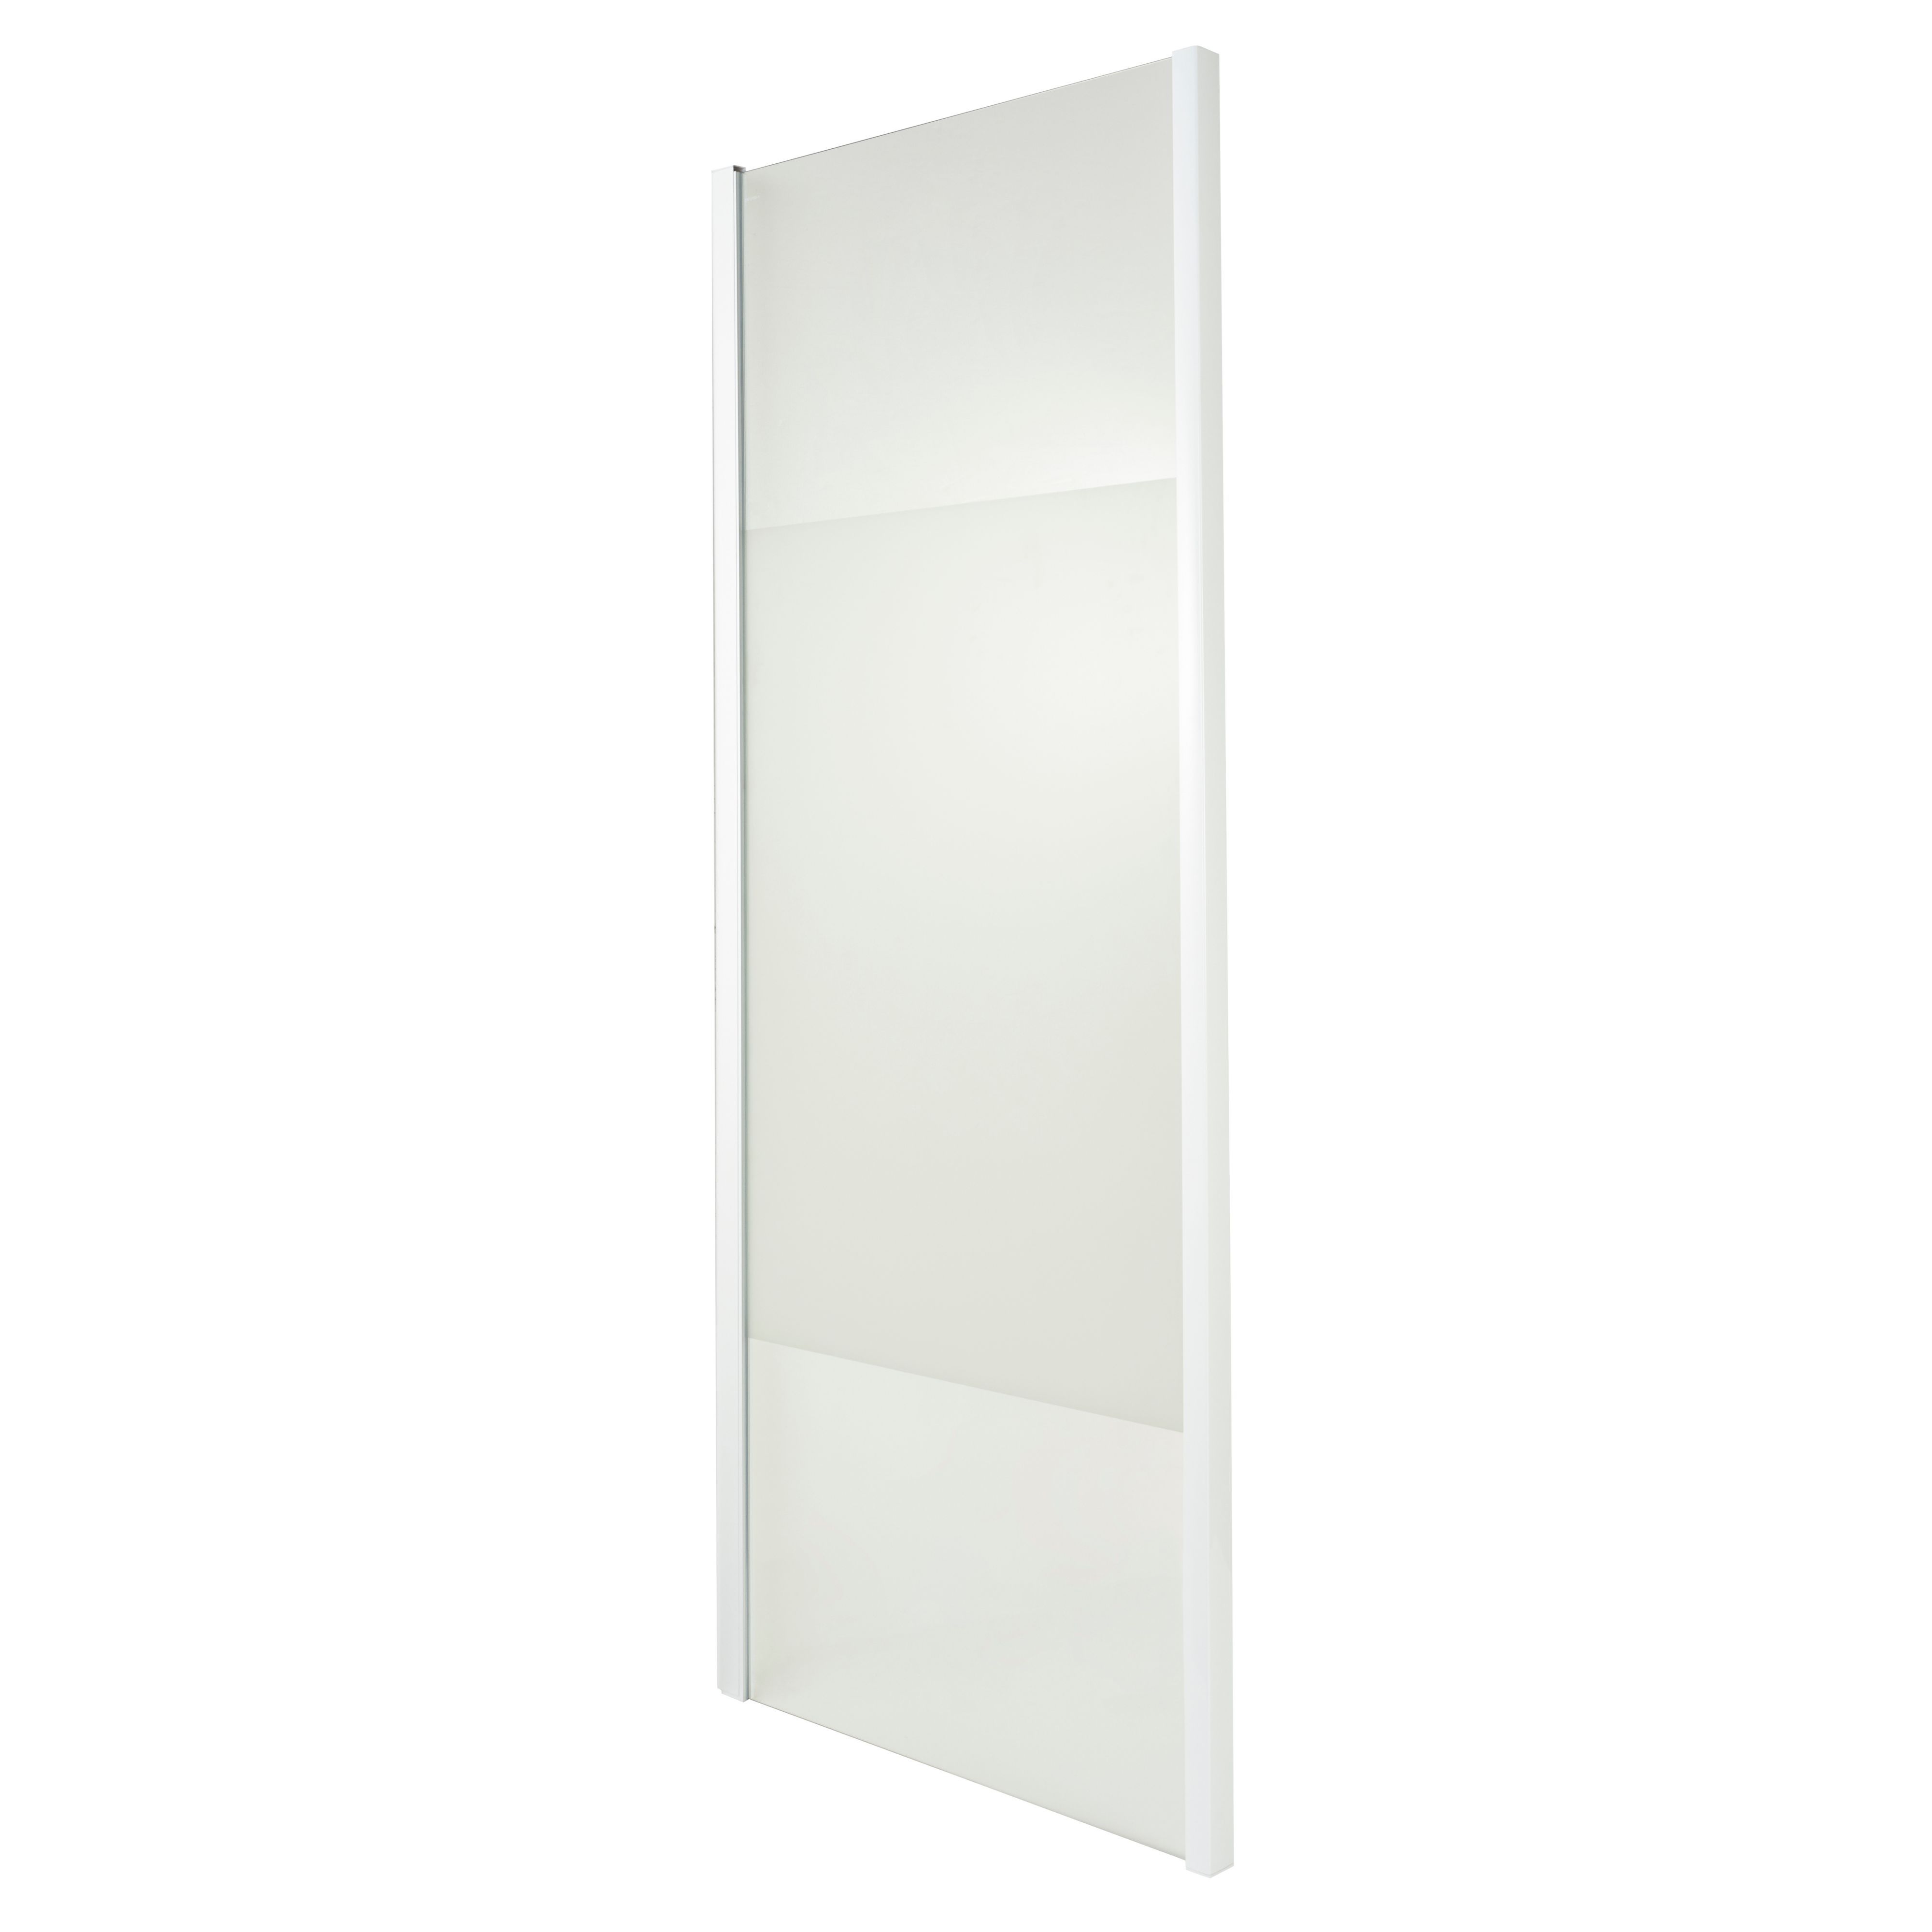 Cooke & Lewis Onega Frosted Fixed Shower panel (H)190cm (W)76cm